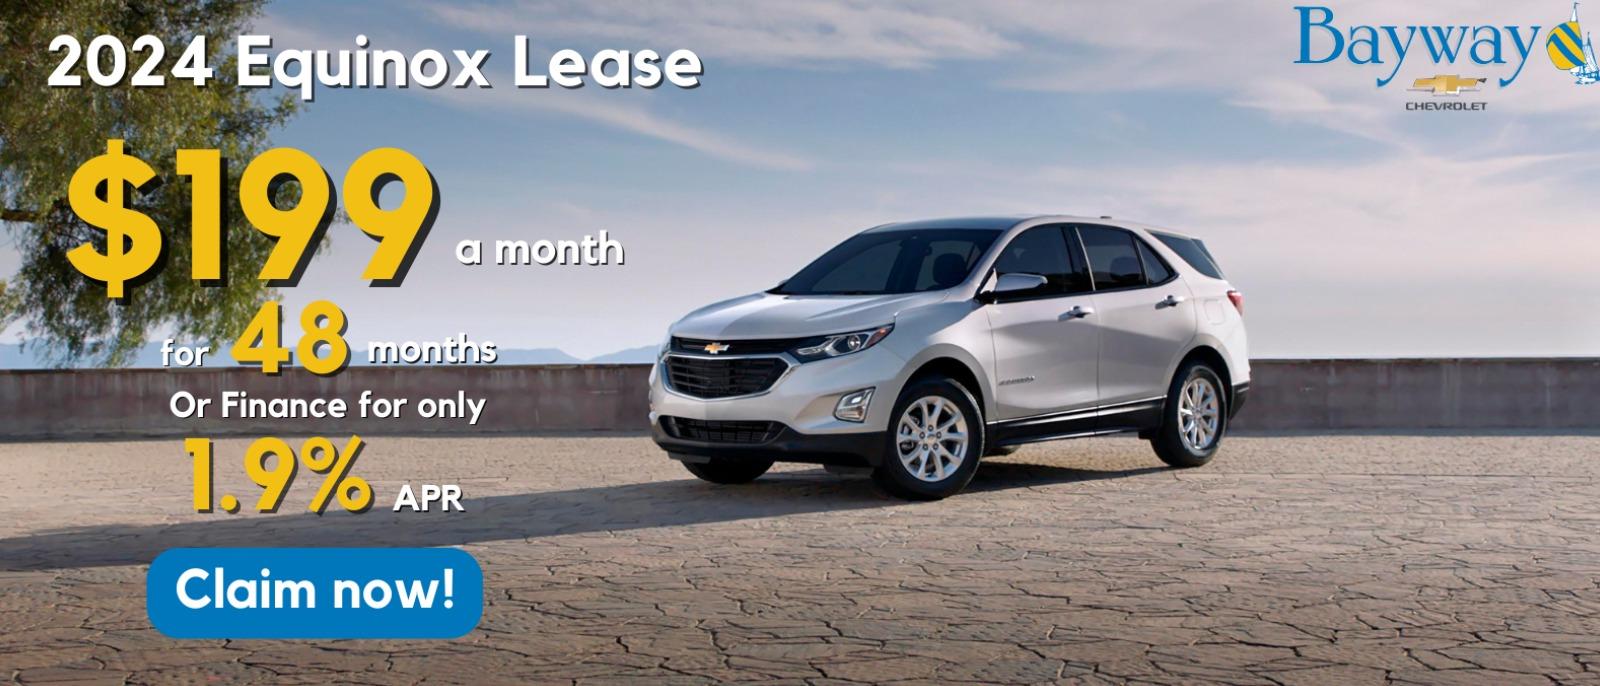 2024 Equinox Lease 
$199 a month for 48 months or finance for only 1.9% APR